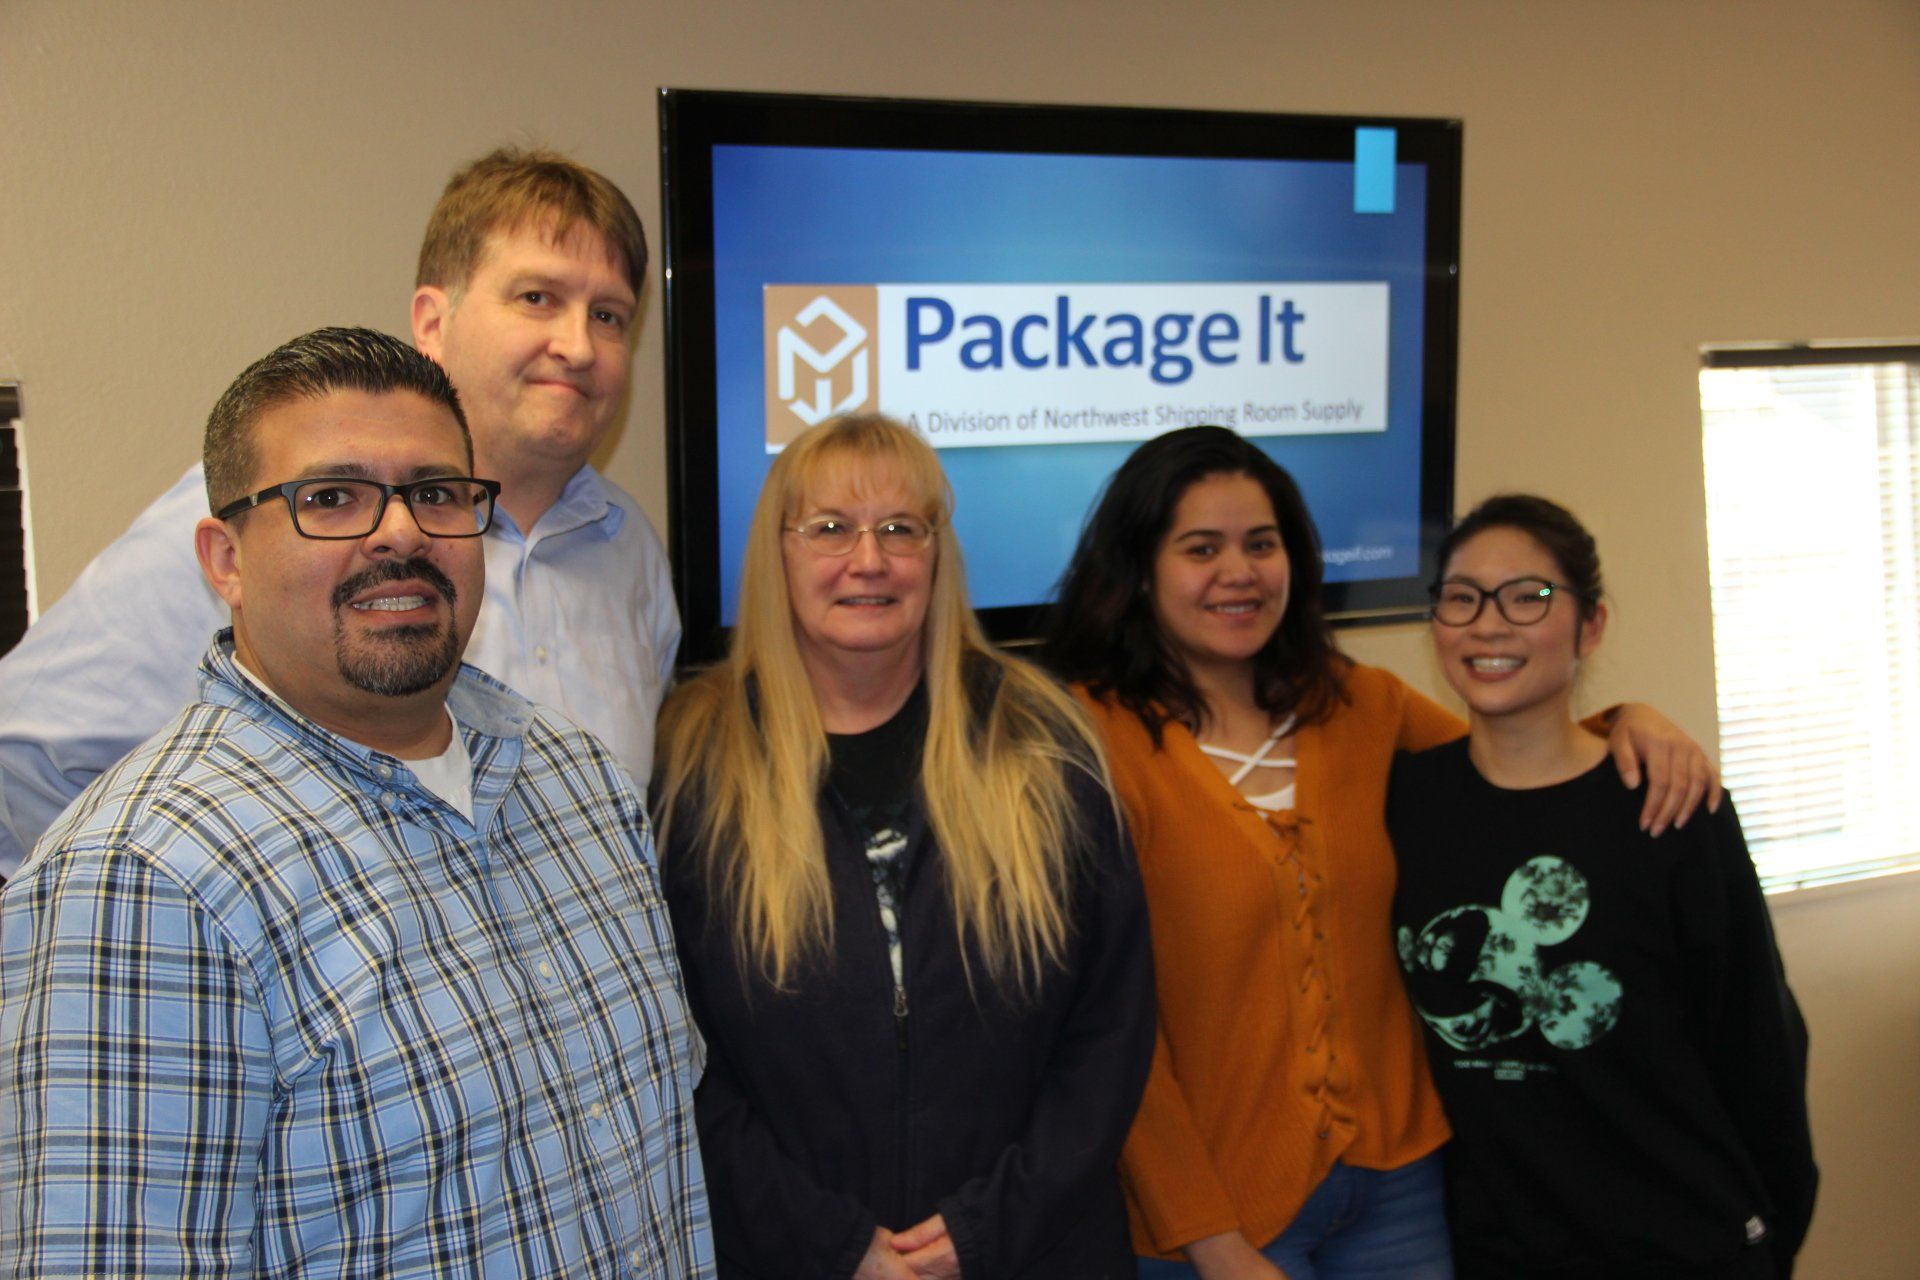 A group of people are posing for a picture in front of a package it sign.